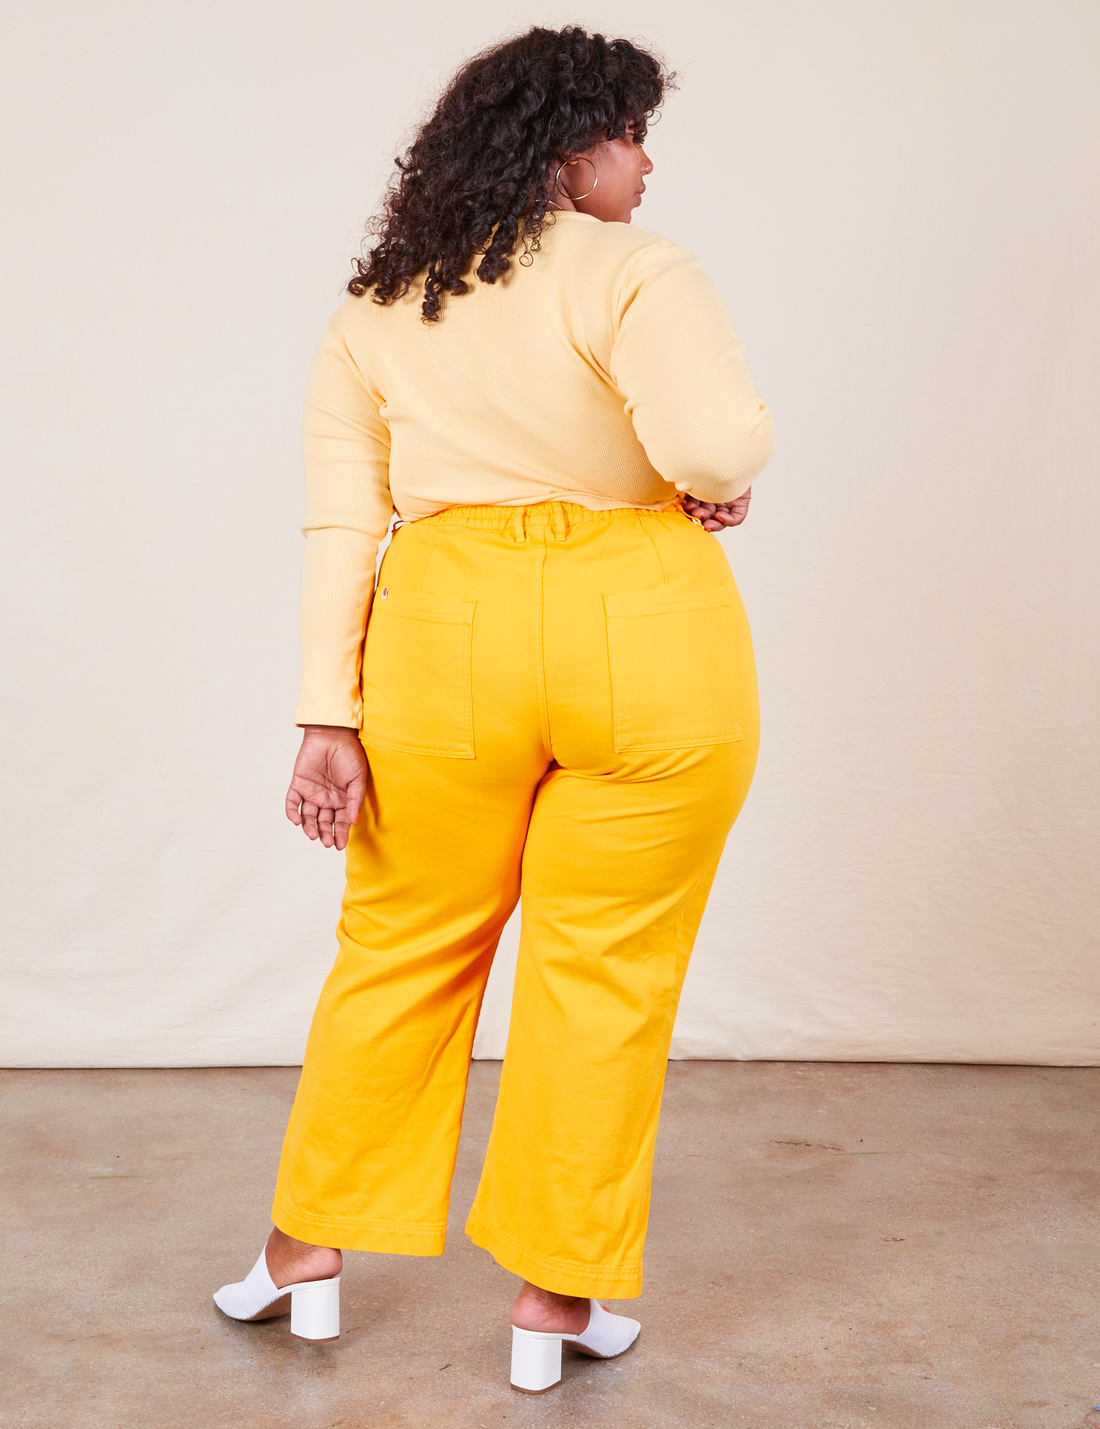 Western Pants in Sunshine Yellow back view on Morgan wearing butter yellow Long Sleeve V-Neck Tee